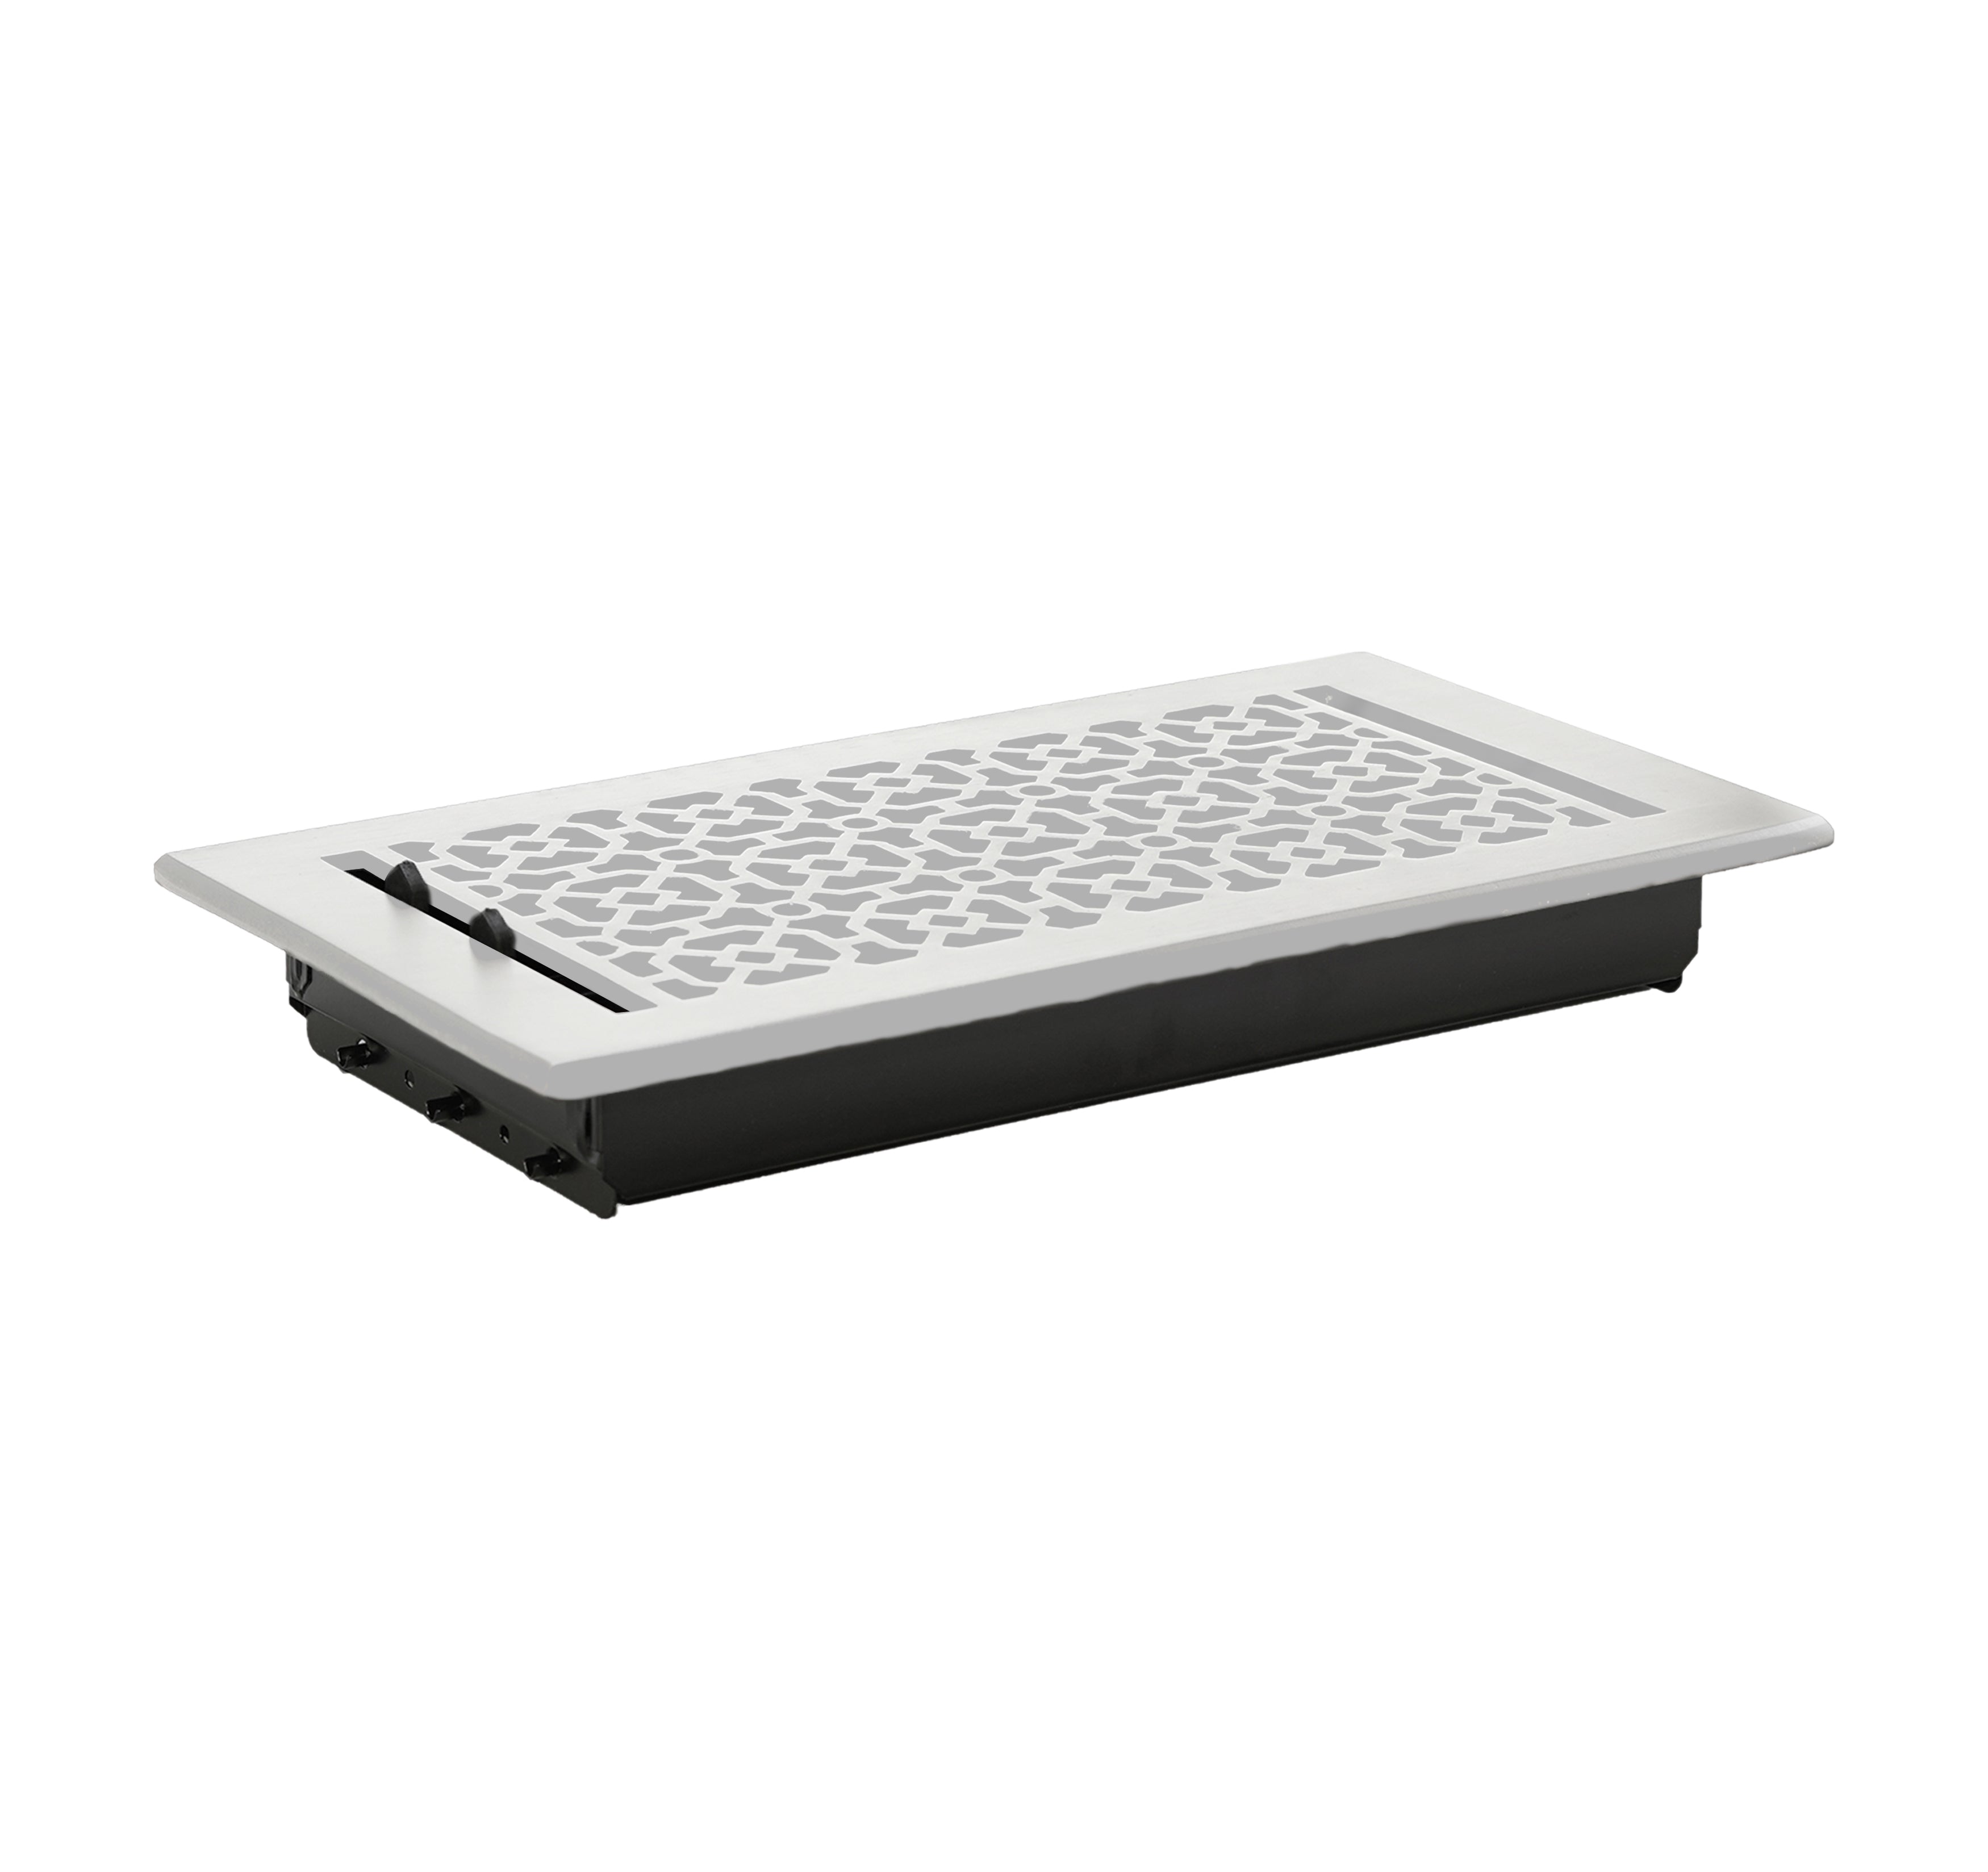 Achtek Air Supply Vent 6"x 14" Duct Opening (Overall 7-1/2"x 15-1/2") Solid Cast Aluminium Register Cover | Powder Coated BLACK